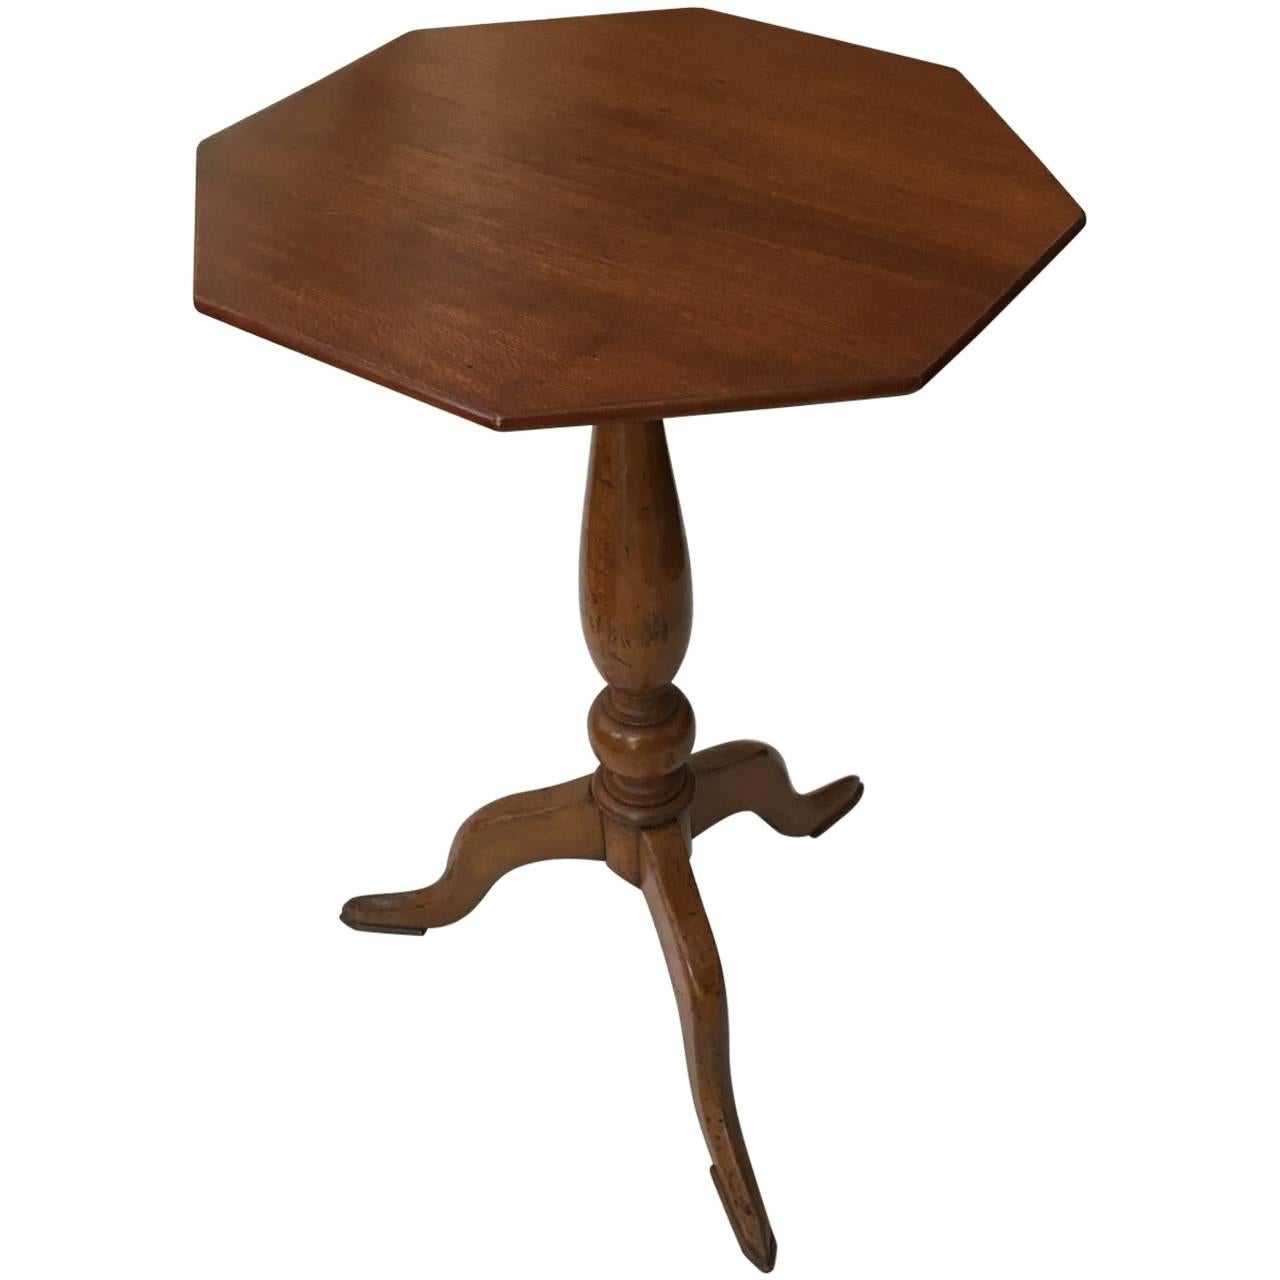 19th Century Continental Fruitwood Table